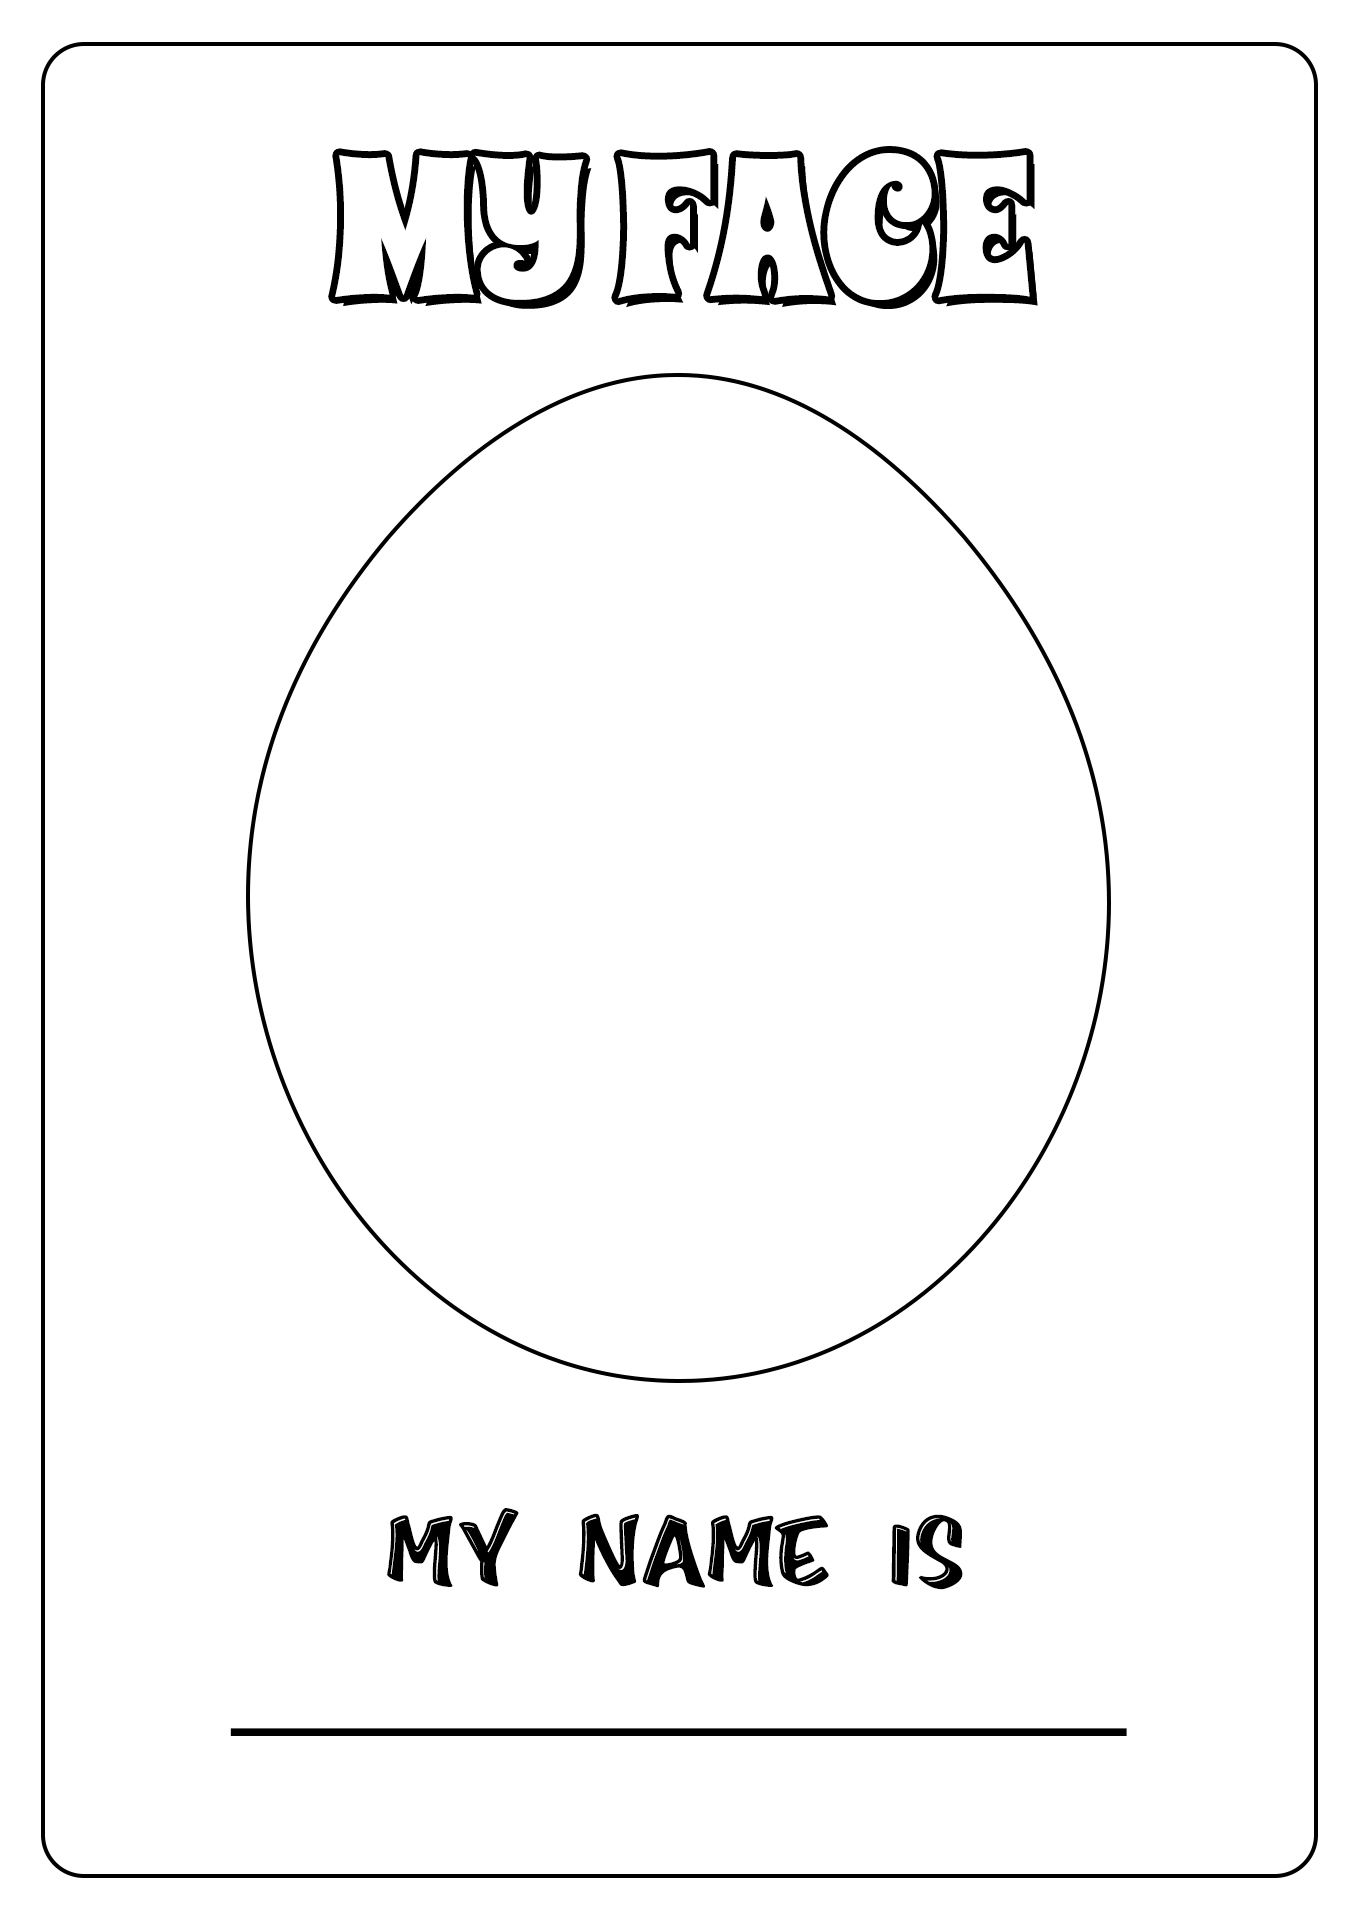 12 Best Images of Self Portrait First Day Of School Worksheets Self